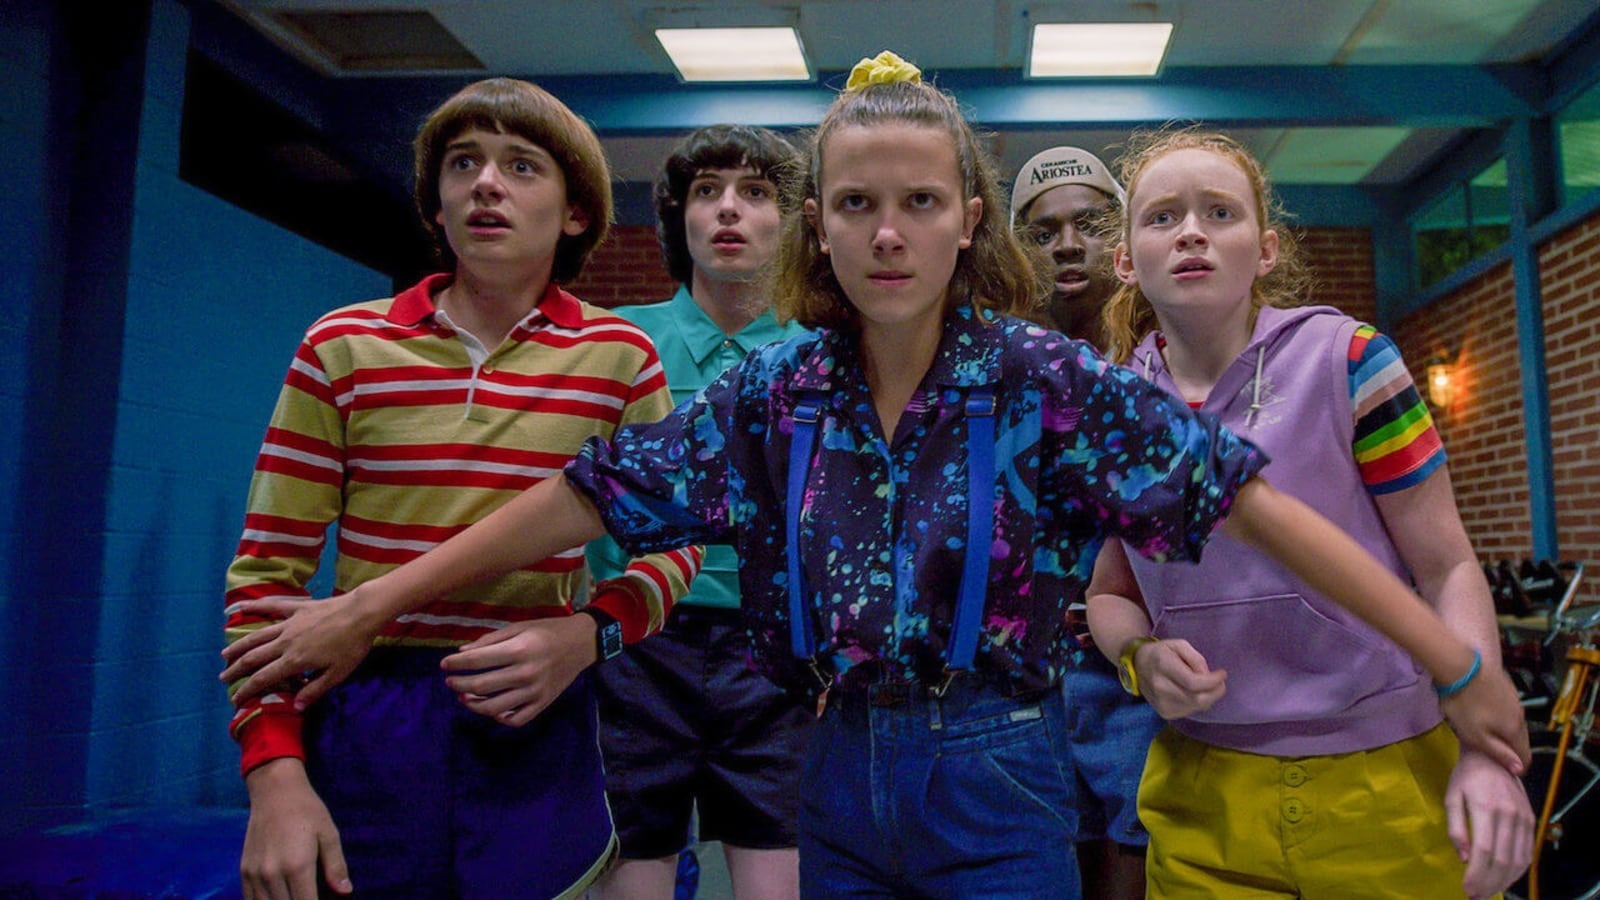 Stranger Things' Directors Were 'Not Loving' When Cast Hit Puberty